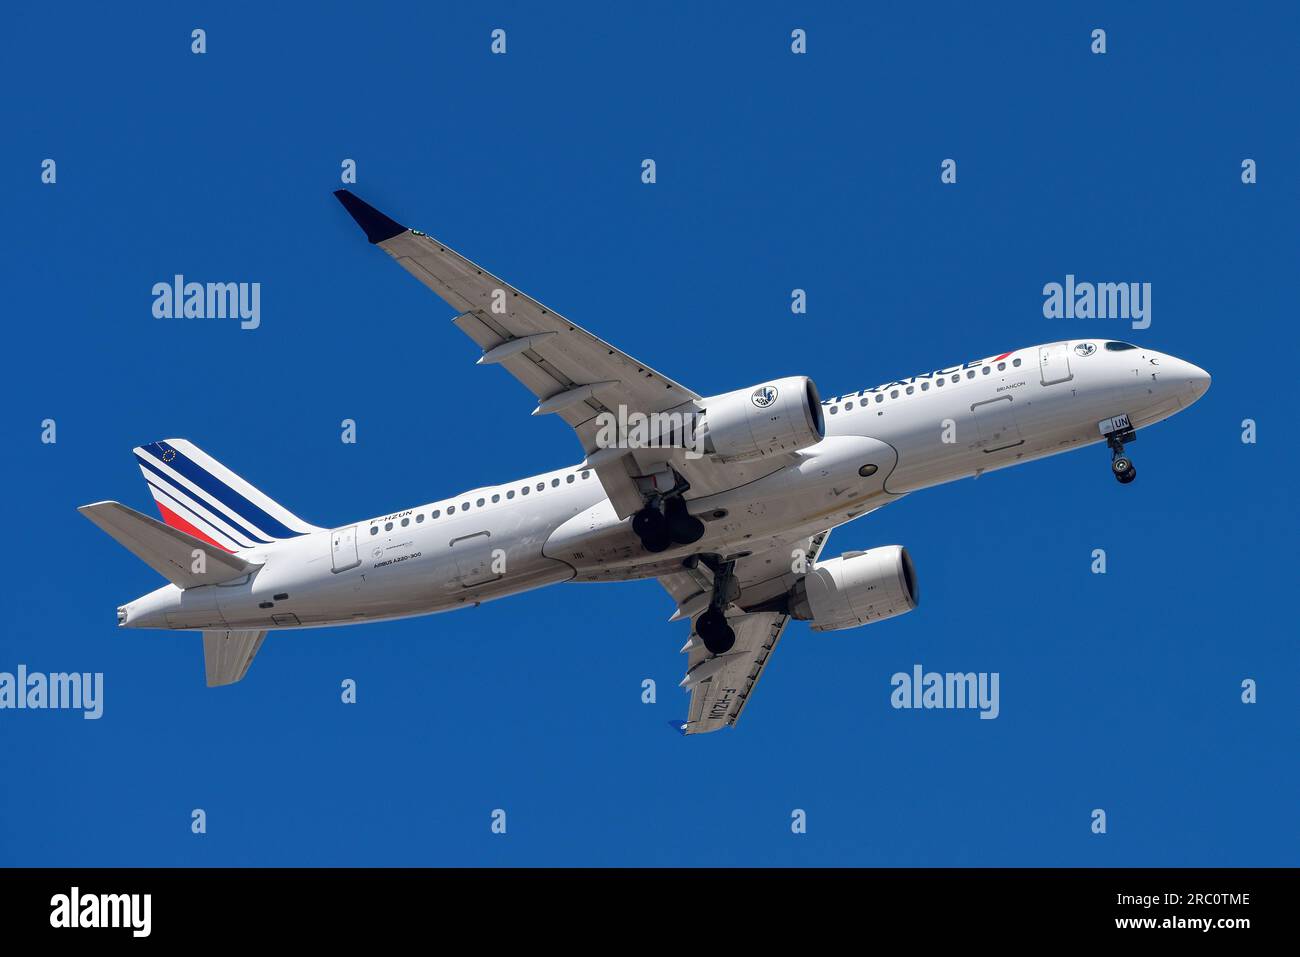 Lisbon, Portugal - July 12, 2023: Air France with aircraft Airbus A220-300 approaching to land at Lisbon International Airport against blue sky Stock Photo